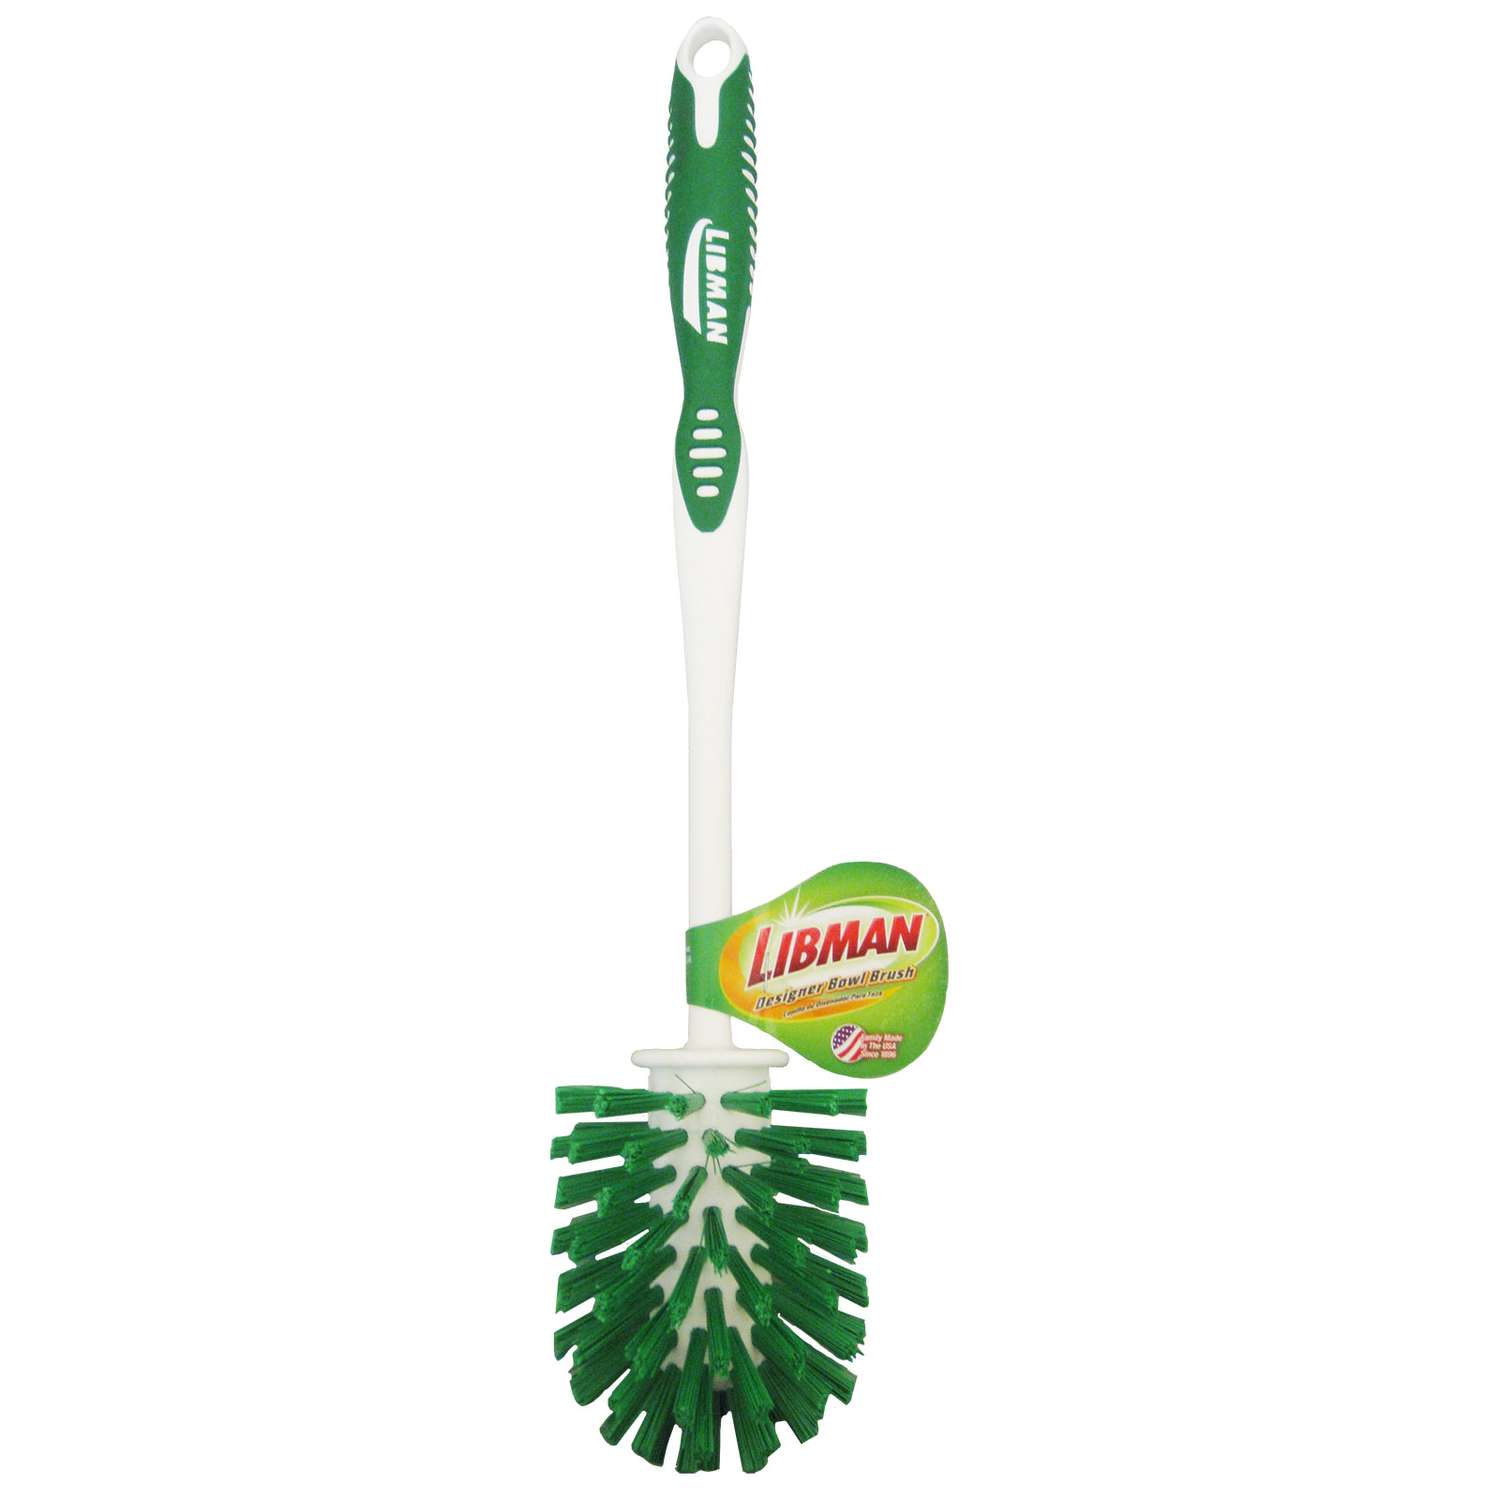 Libman - Libman Brush  Online grocery shopping & Delivery - Smart